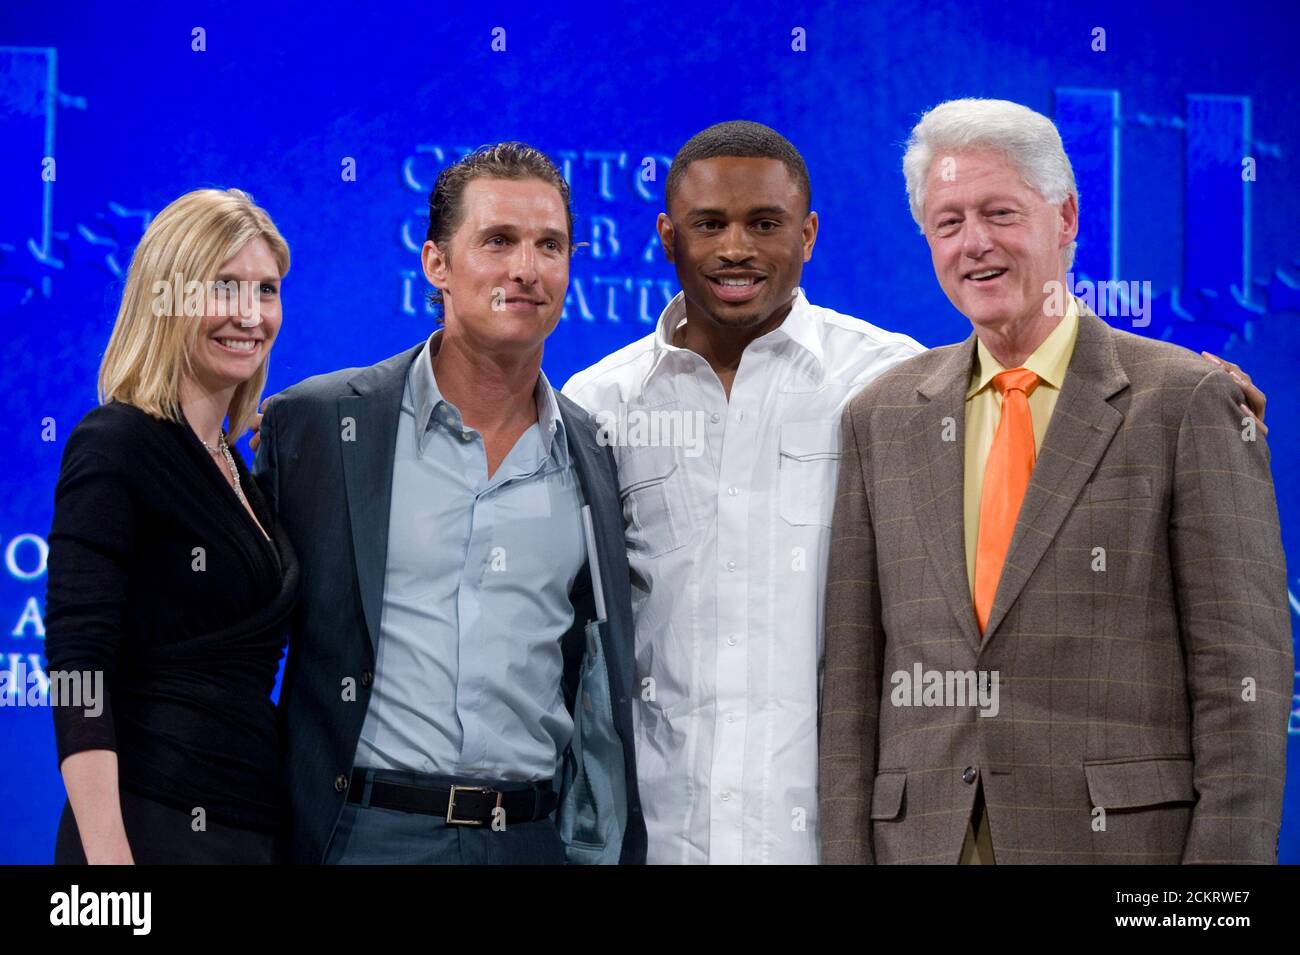 Austin, TX February 14, 2009: Former President Bill Clinton (r) hosts the second-annual Clinton Global Initiative University, a conference bringing together more than 1,000 students to take action on global challenges such as poverty, hunger, energy, climate change and global health. Left to right are Marie Tillman, actor Matthew McConaughey, NFL player Nnamdi Asomugha and Clinton. ©Bob Daemmrich Stock Photo